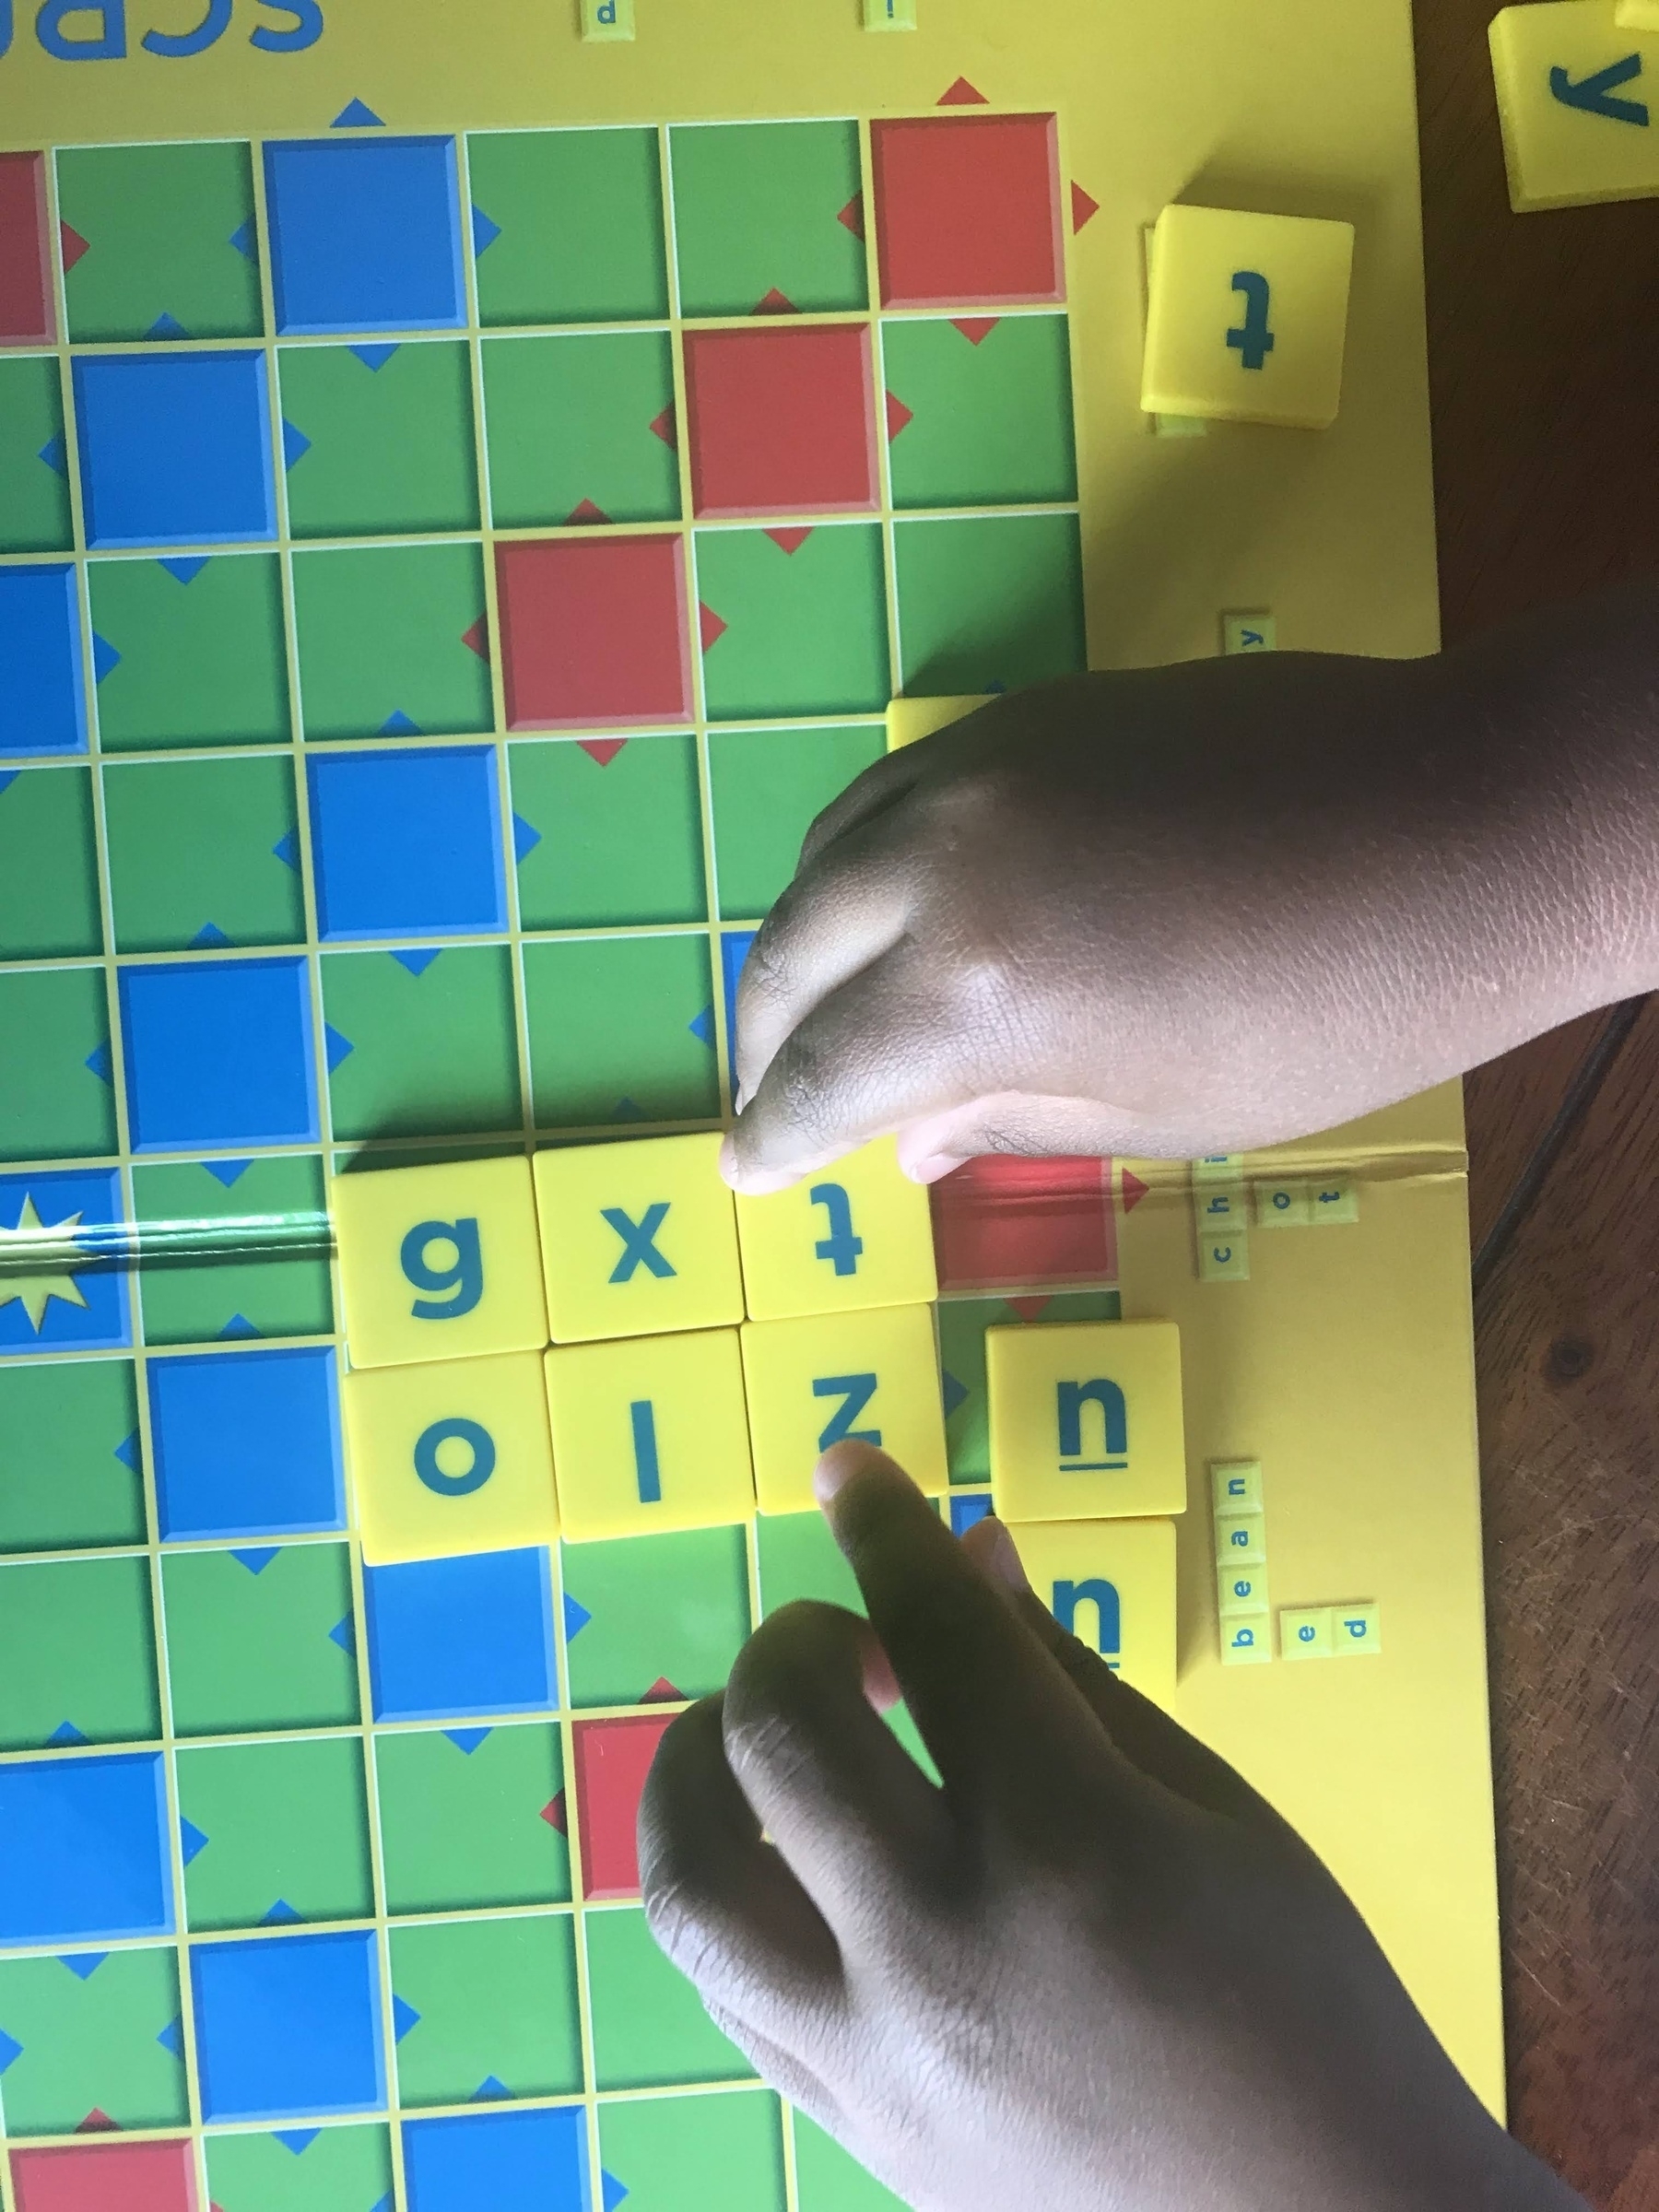 Three year old hands placing Scrabble pieces spelling "oizn"